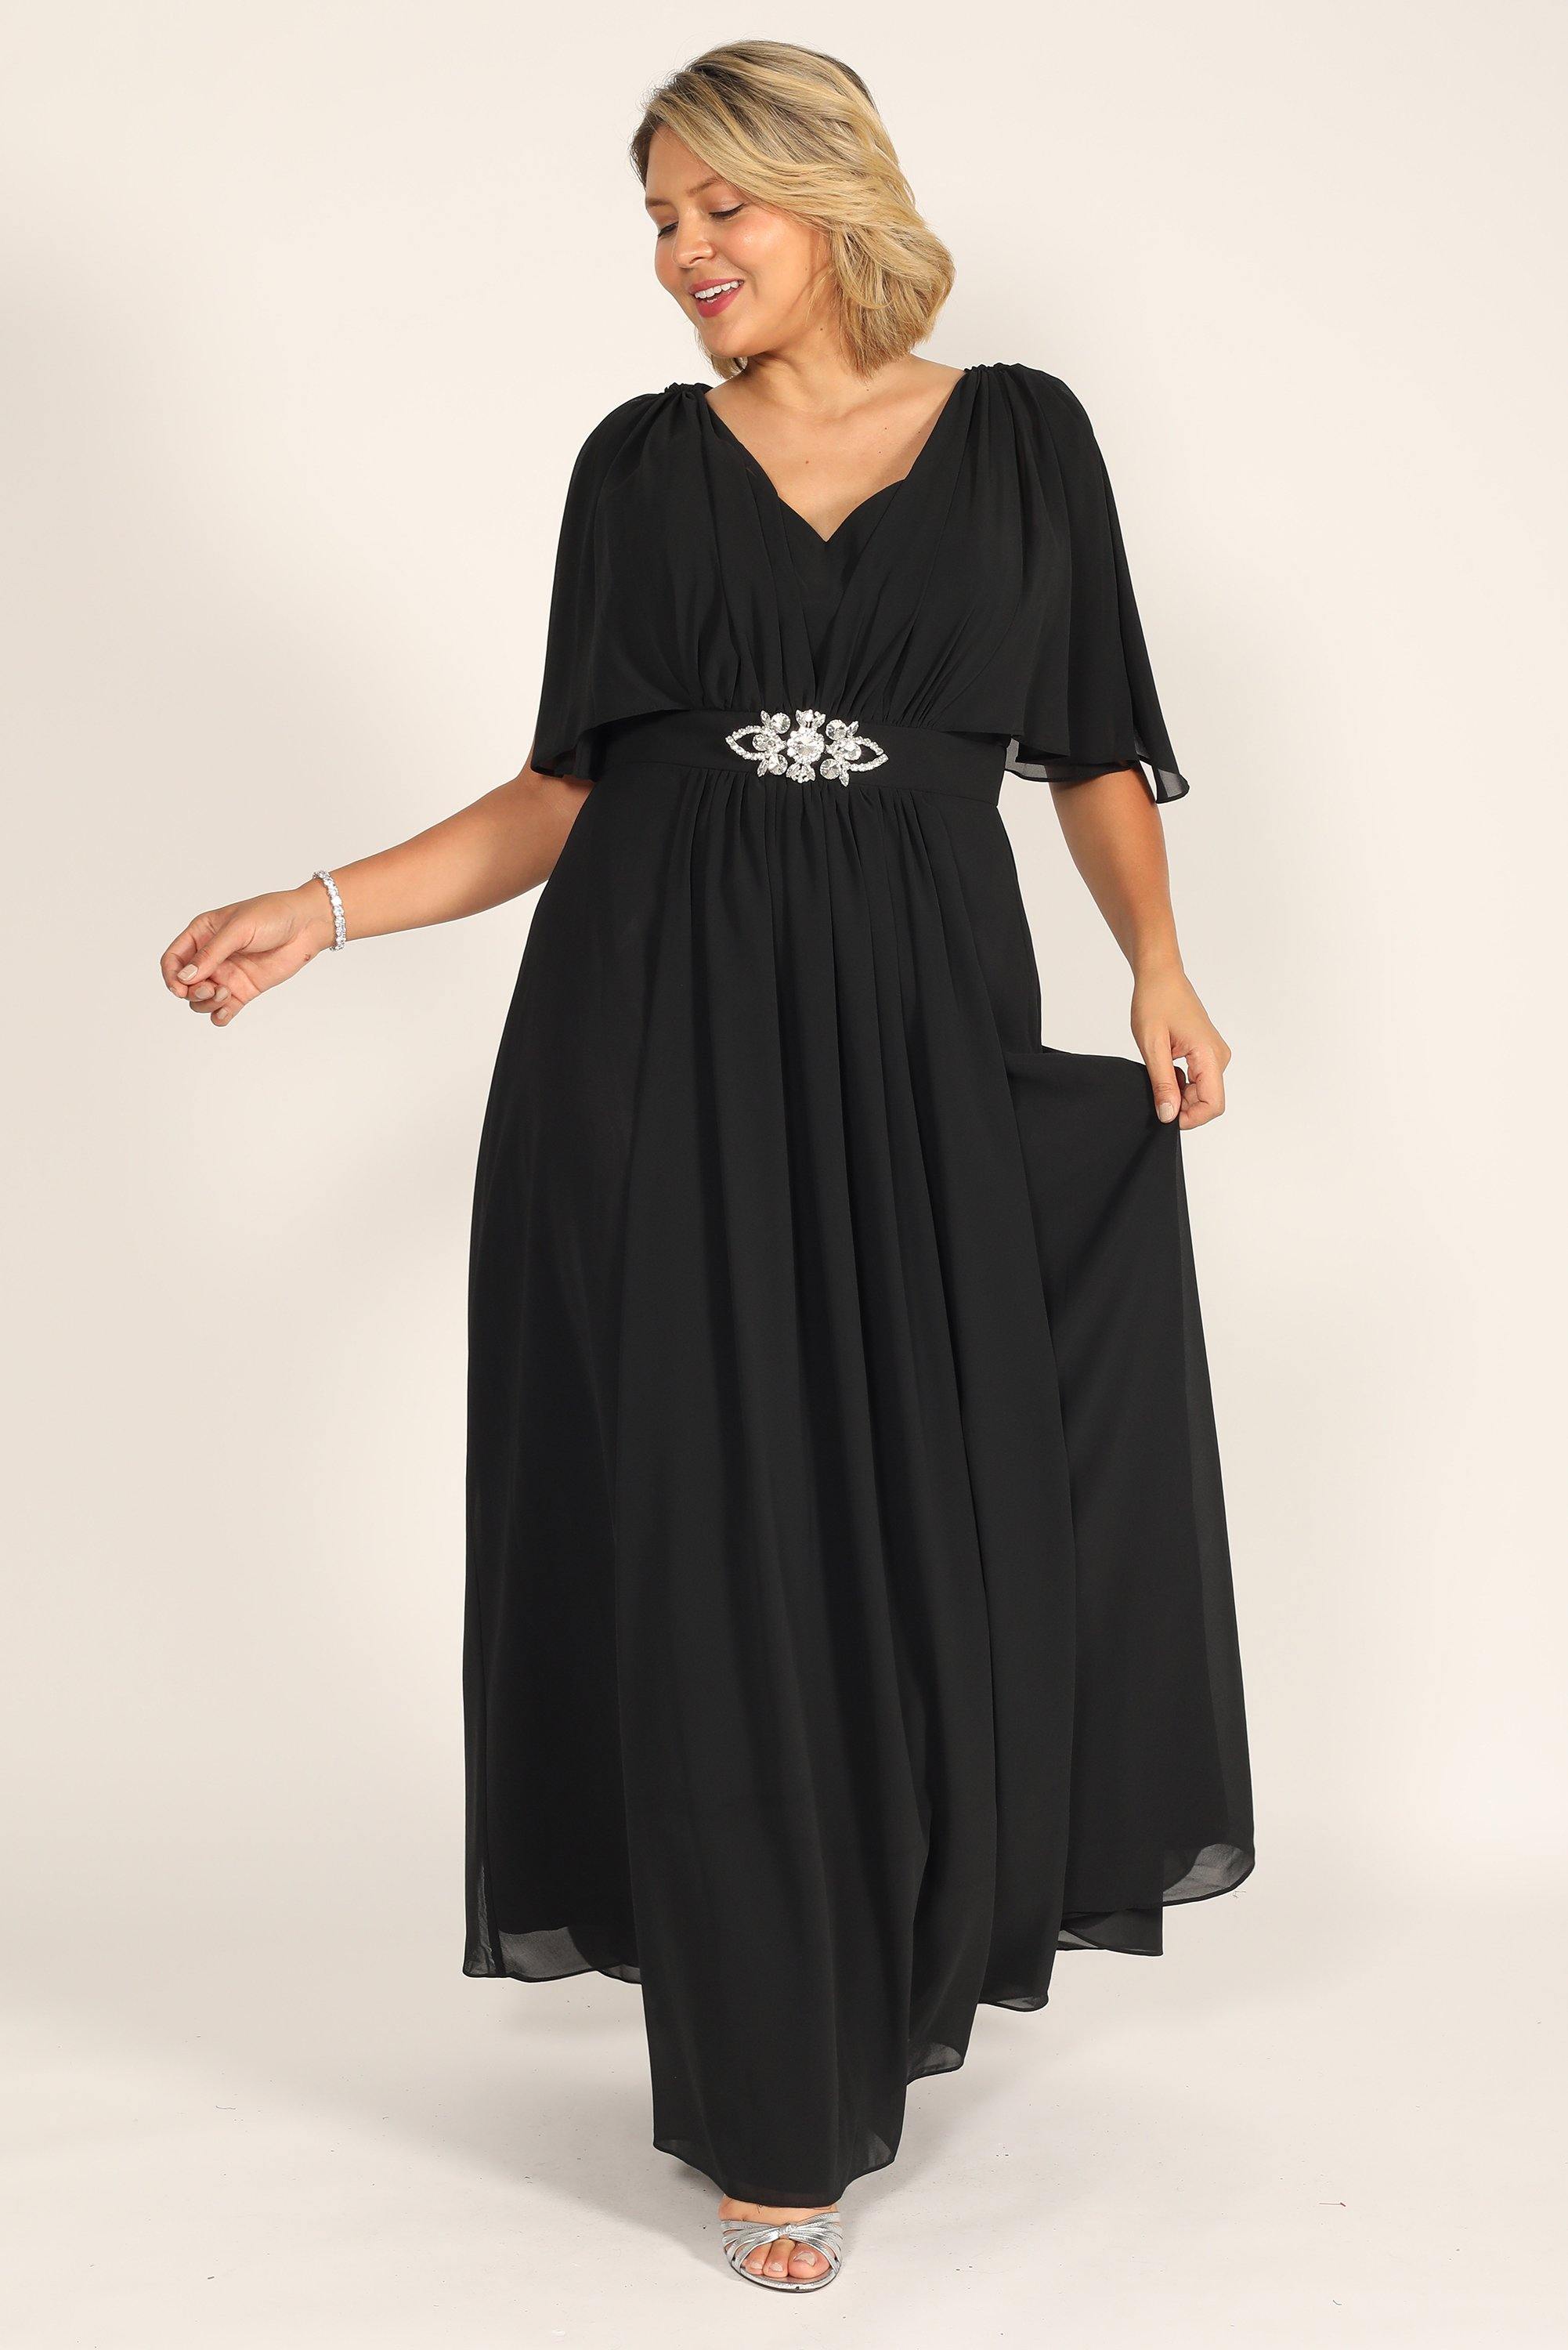 Long Formal Mother of the Bride Dress | The Dress Outlet